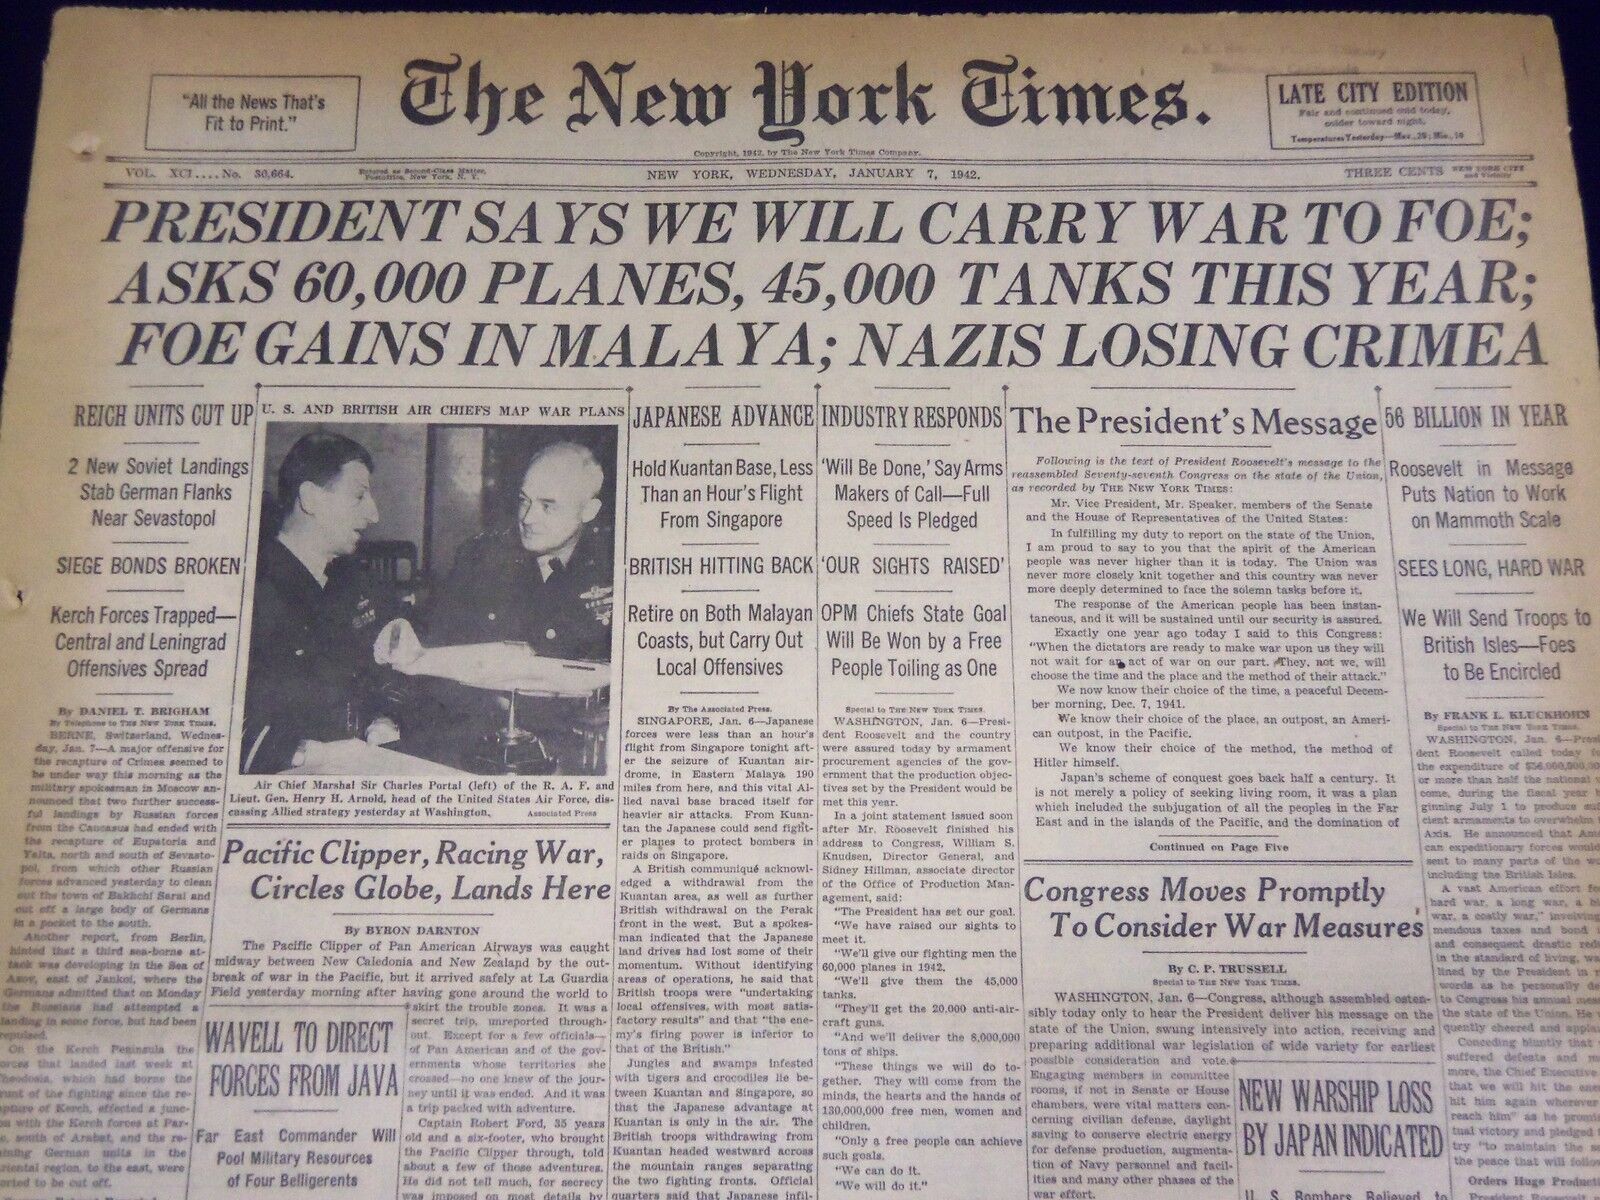 1942 JANUARY 7 NEW YORK TIMES - PRESIDENT SAYS WE WILL CARRY WAR TO FOE- NT 1530